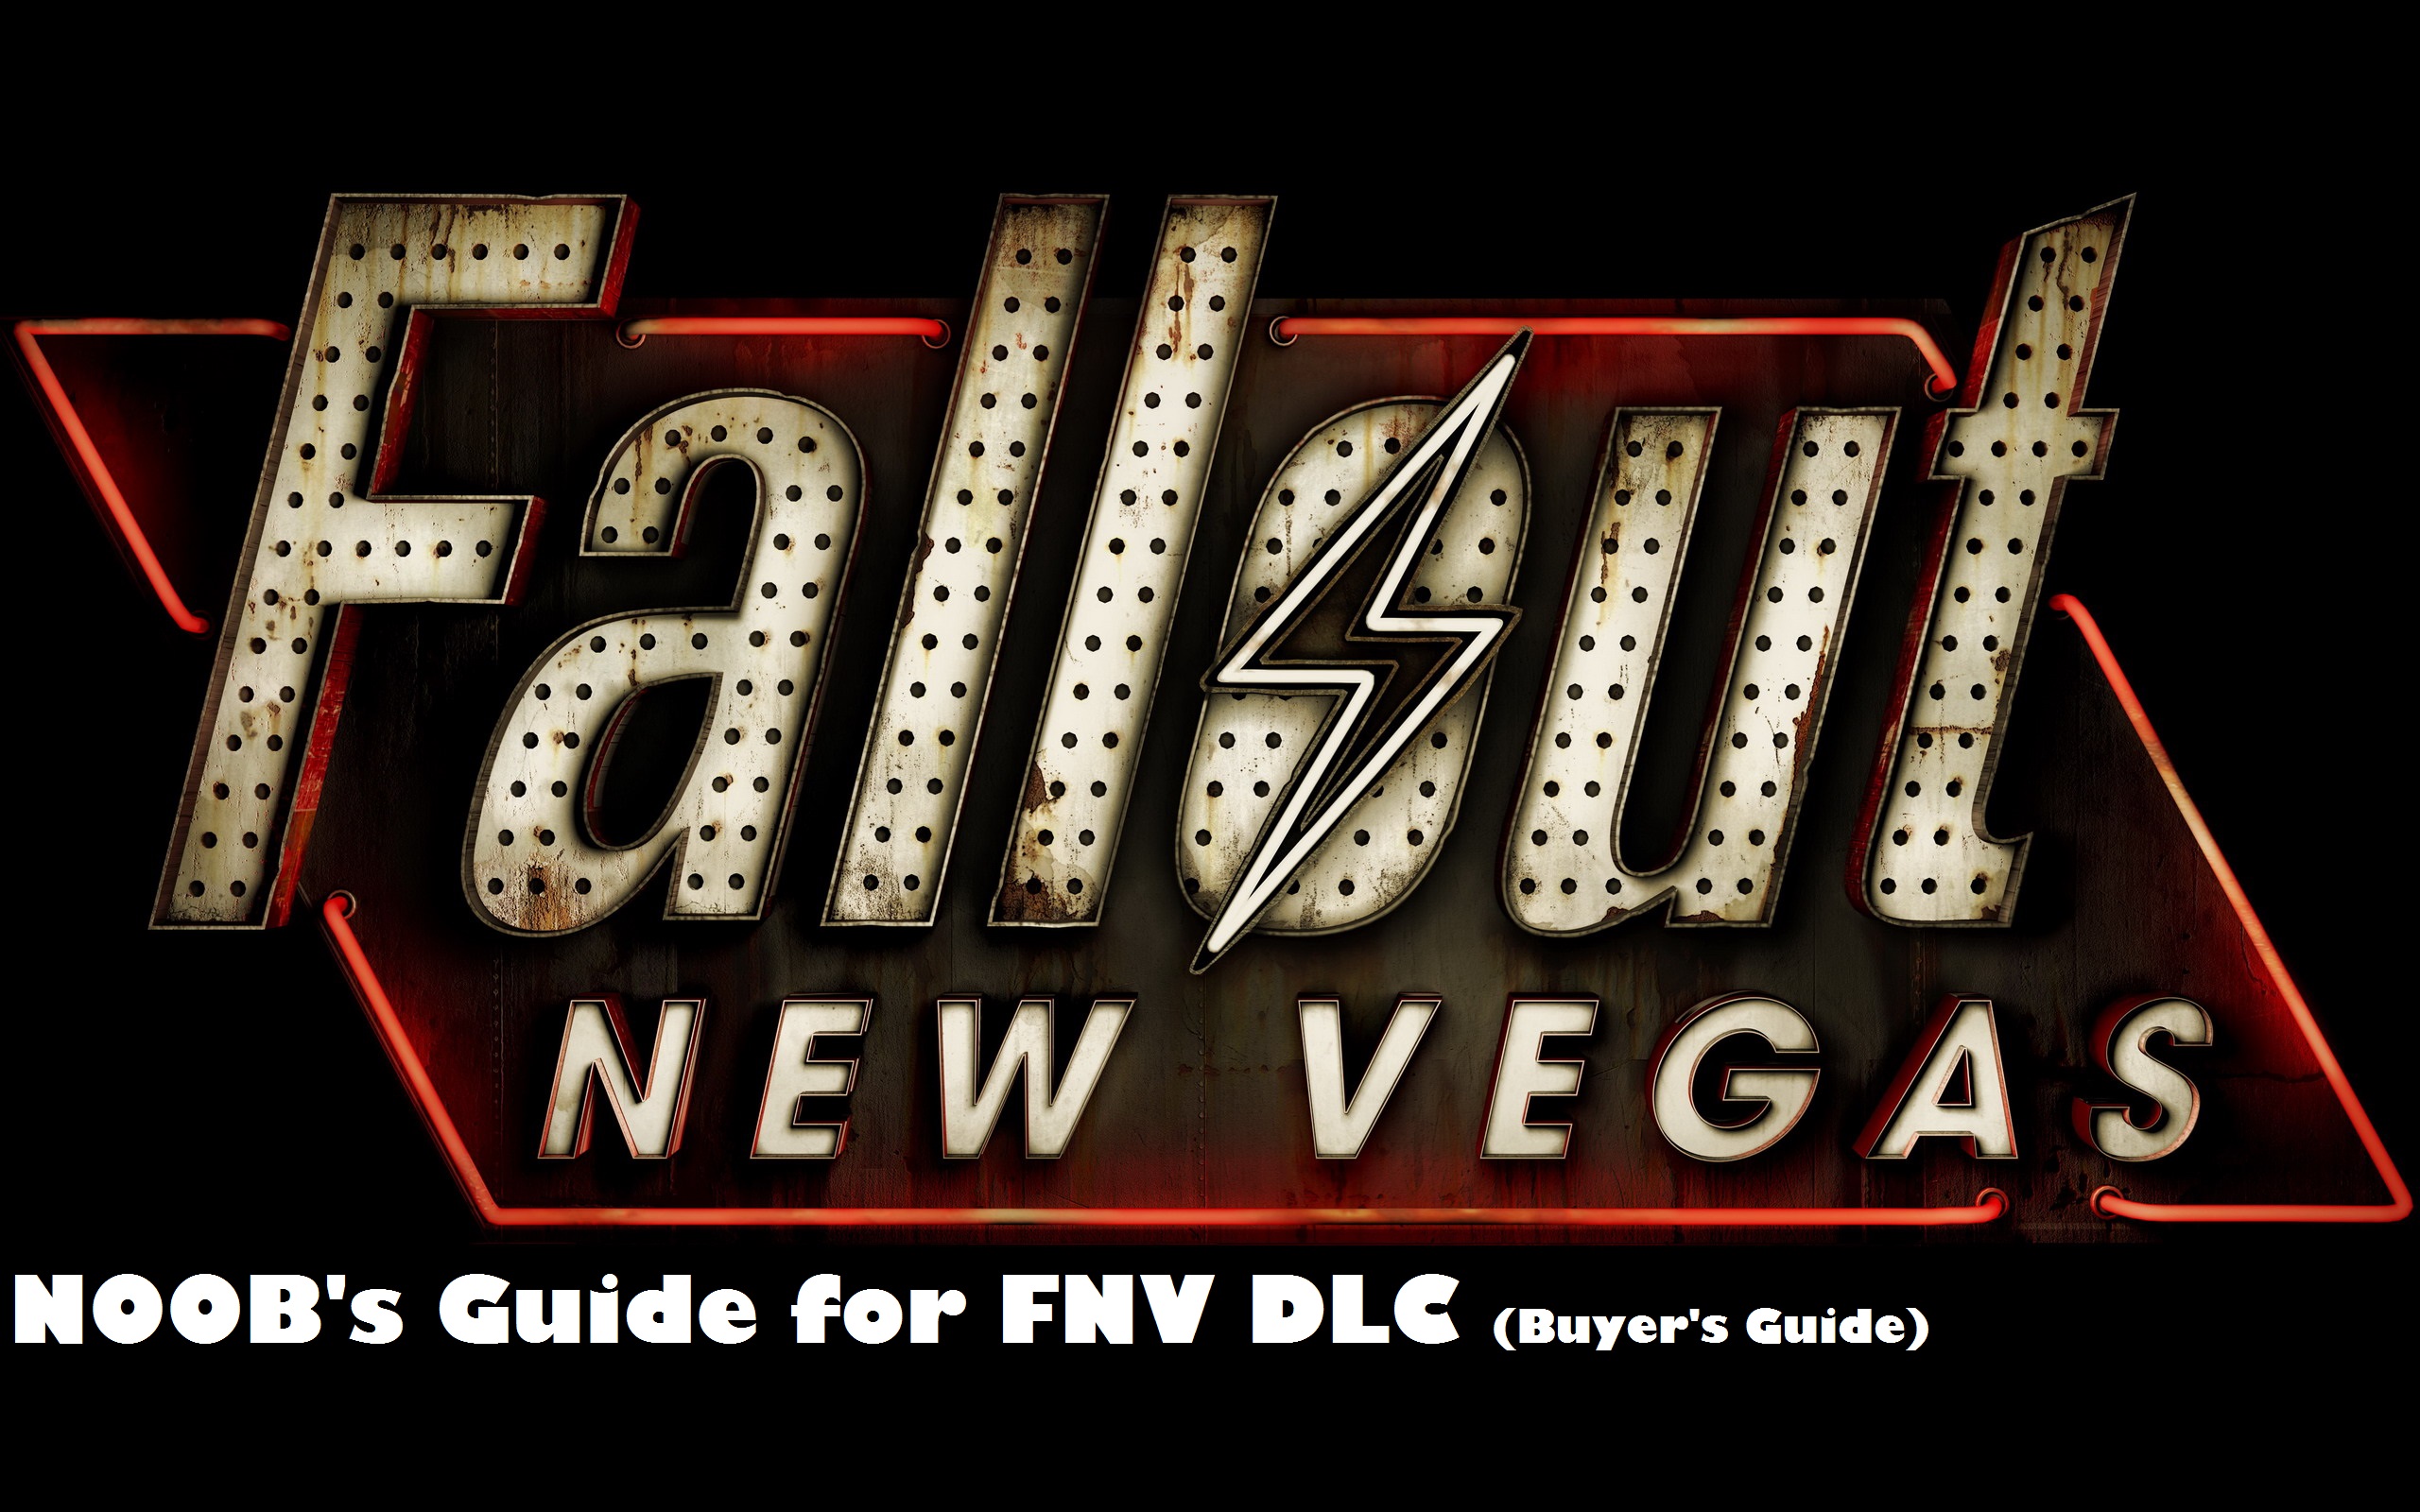 NOOB's Guide for FNV DLC (BUYER'S GUIDE) for Fallout: New Vegas